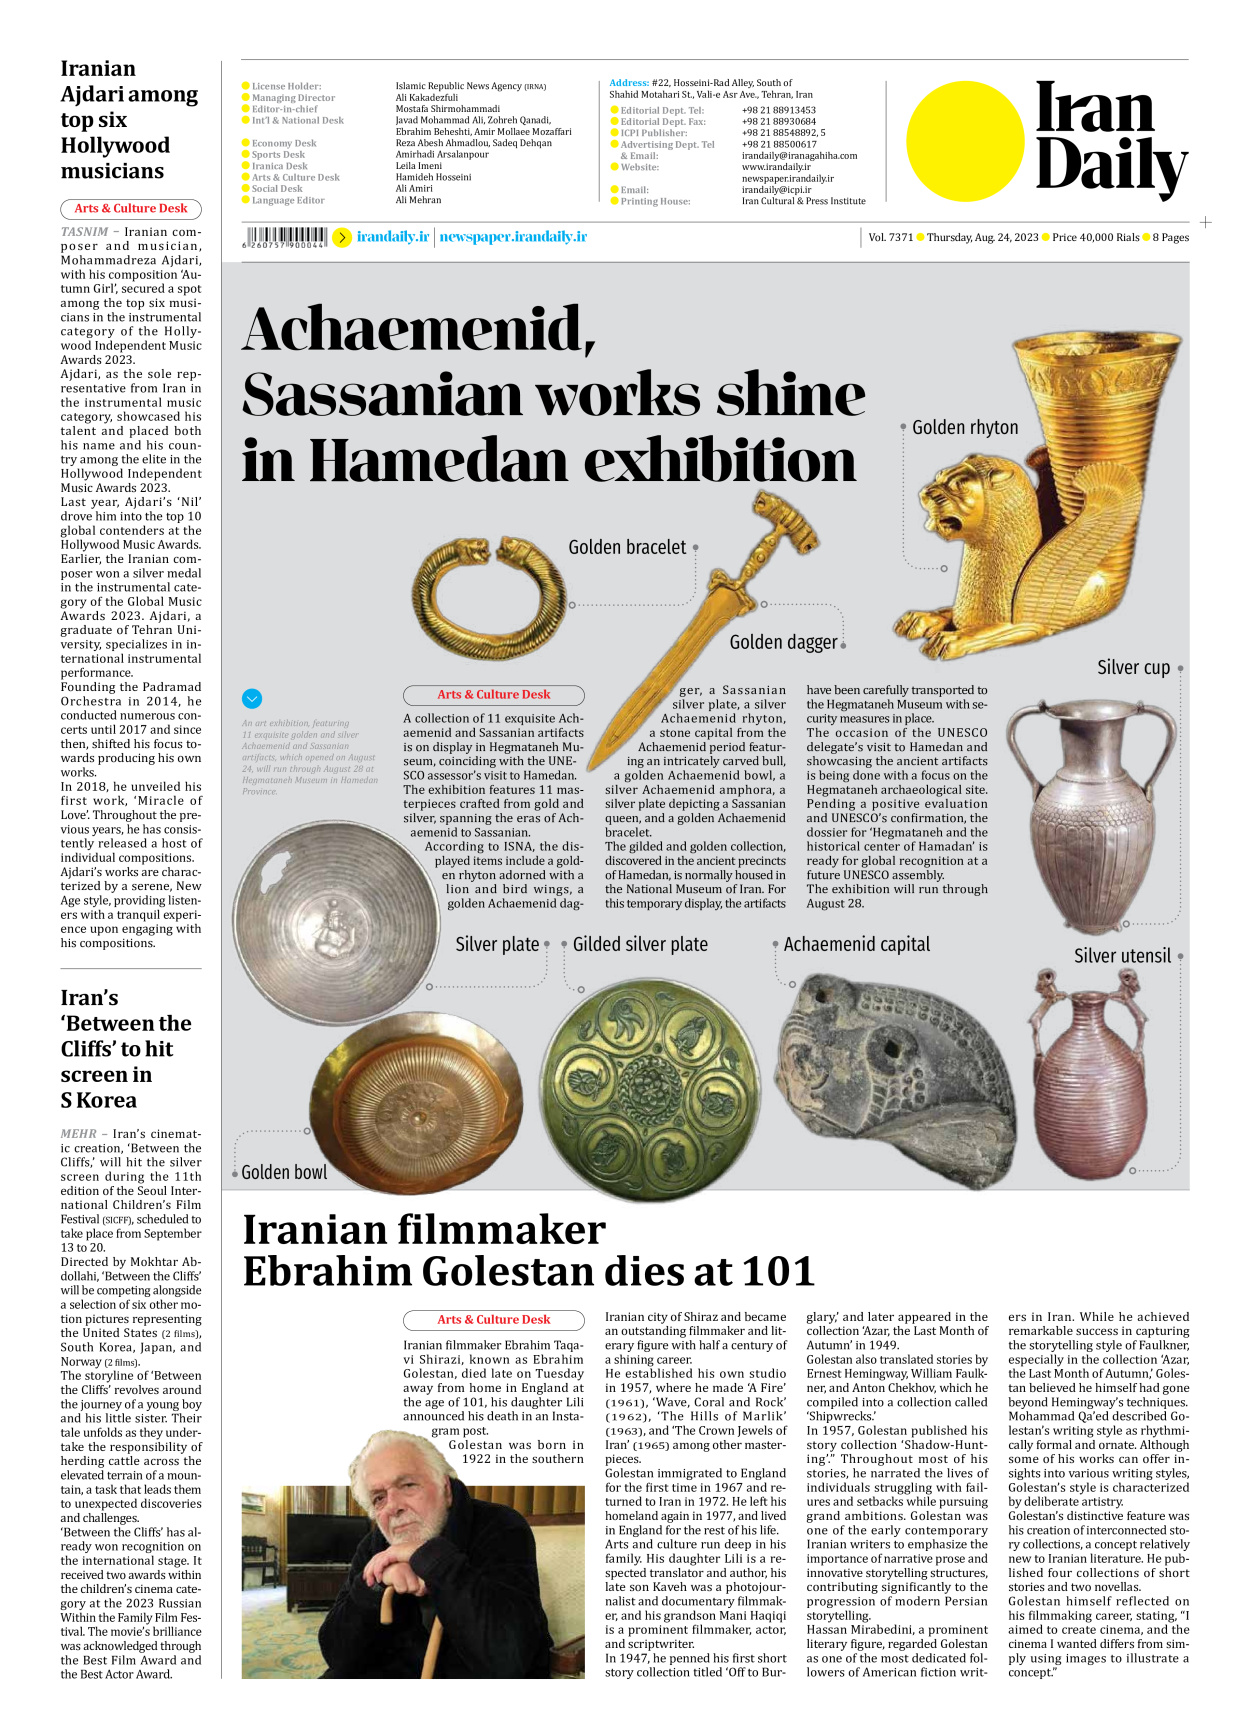 Iran Daily - Number Seven Thousand Three Hundred and Seventy One - 24 August 2023 - Page 8